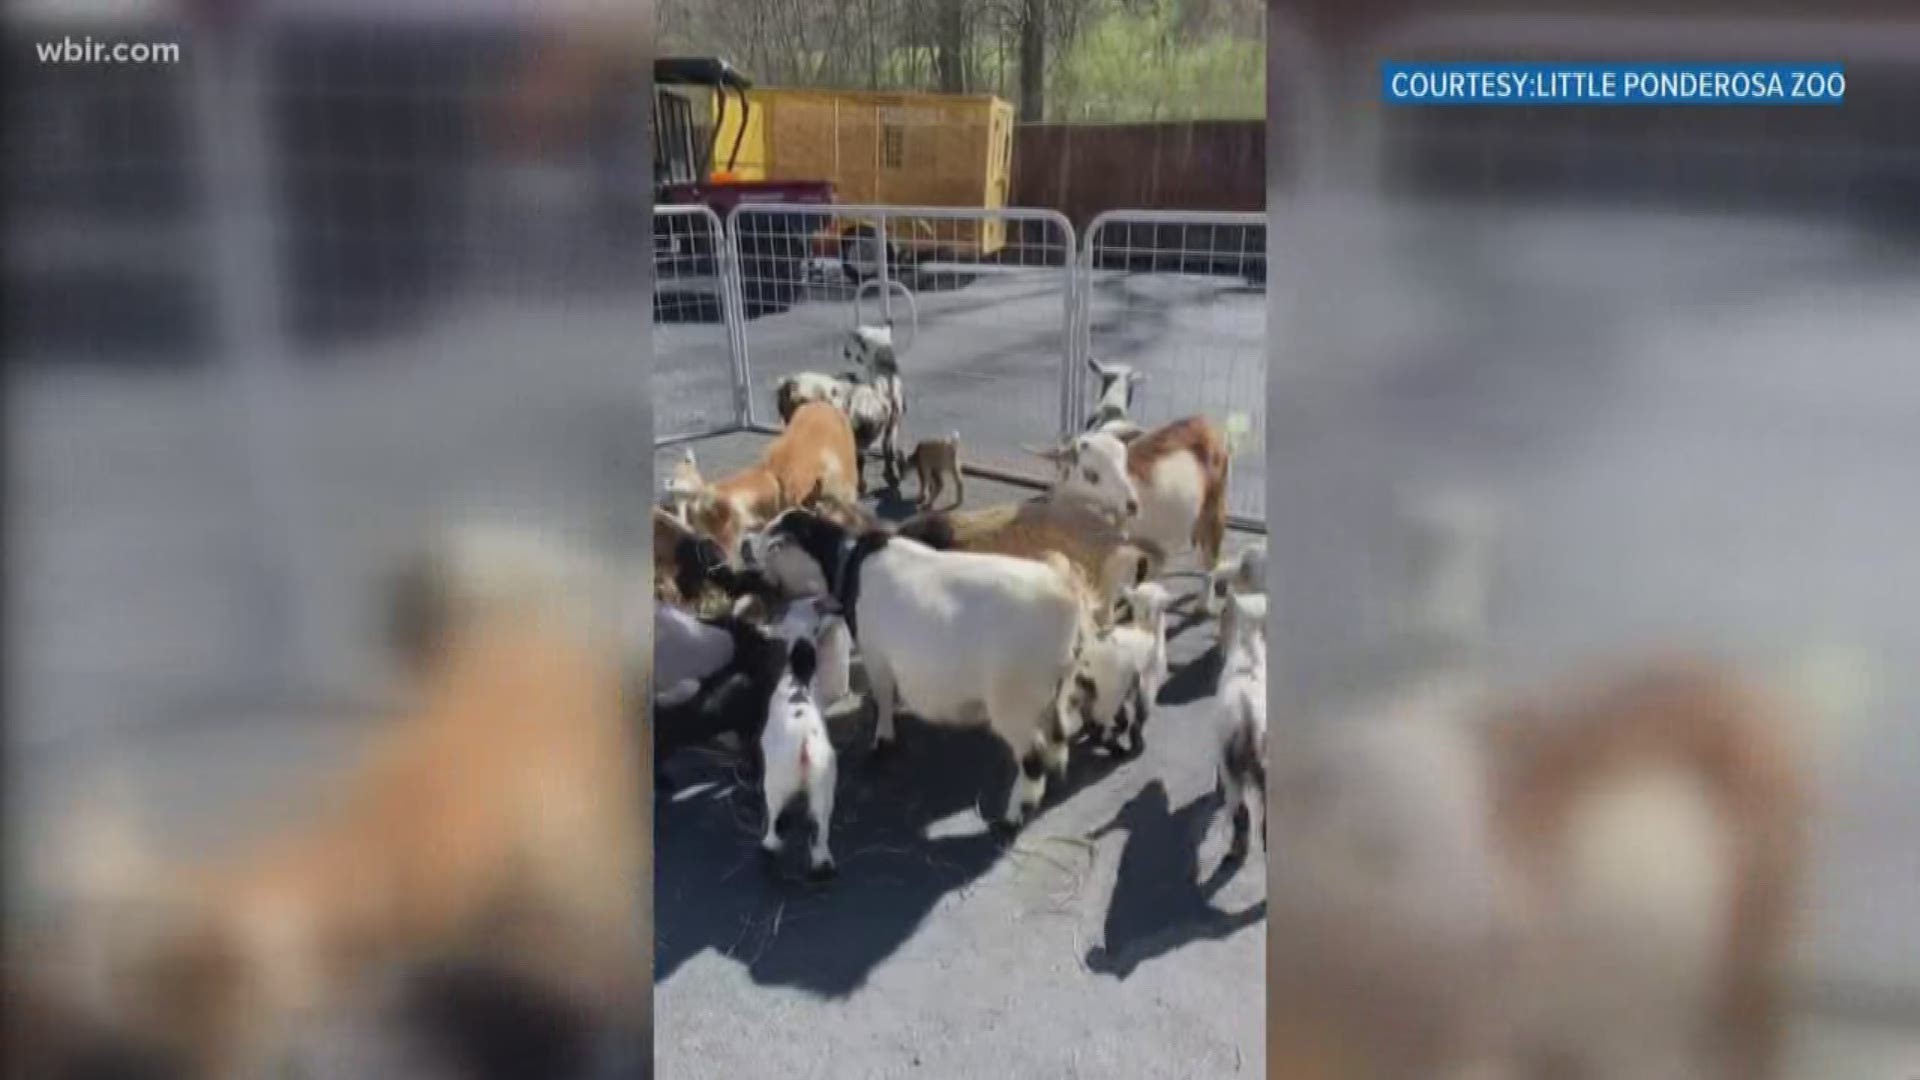 Little Ponderosa Zoo said it was not kidding around after it welcomed 85 new baby goats to the rescue.